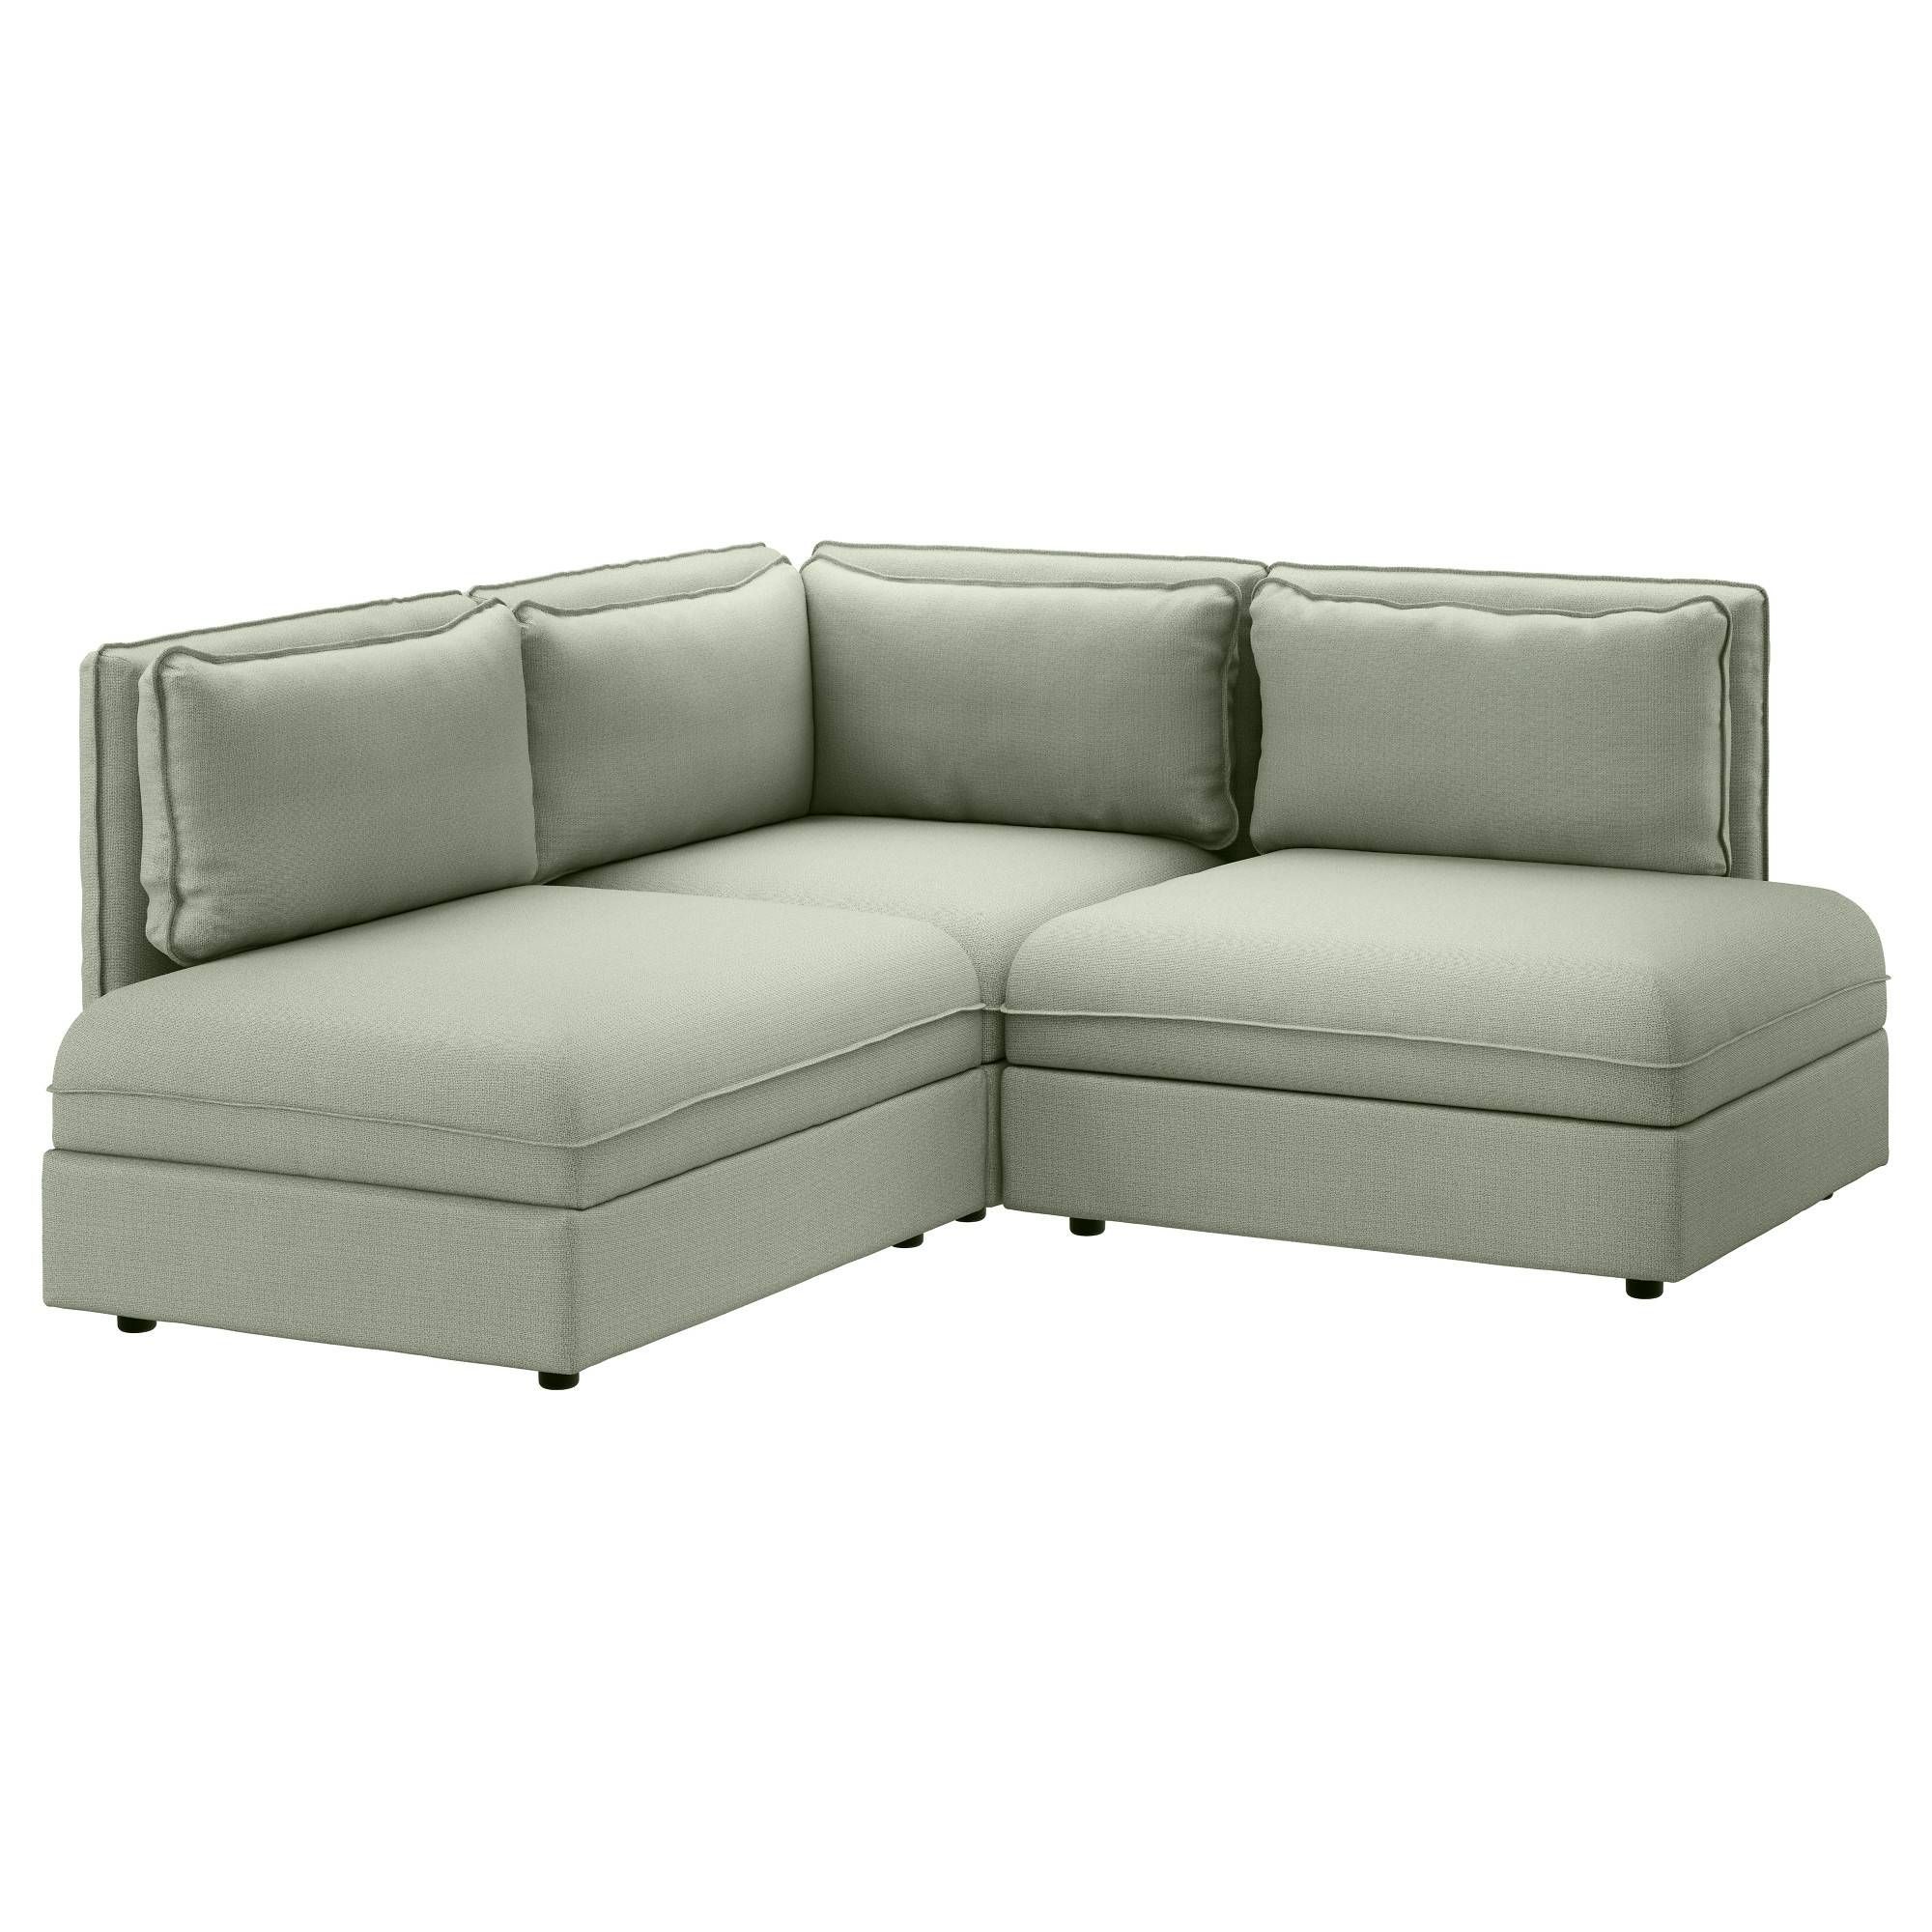 Furniture & Rug: Cheap Sectional Couches For Home Furniture Idea Throughout Small Modular Sectional Sofa (View 20 of 25)